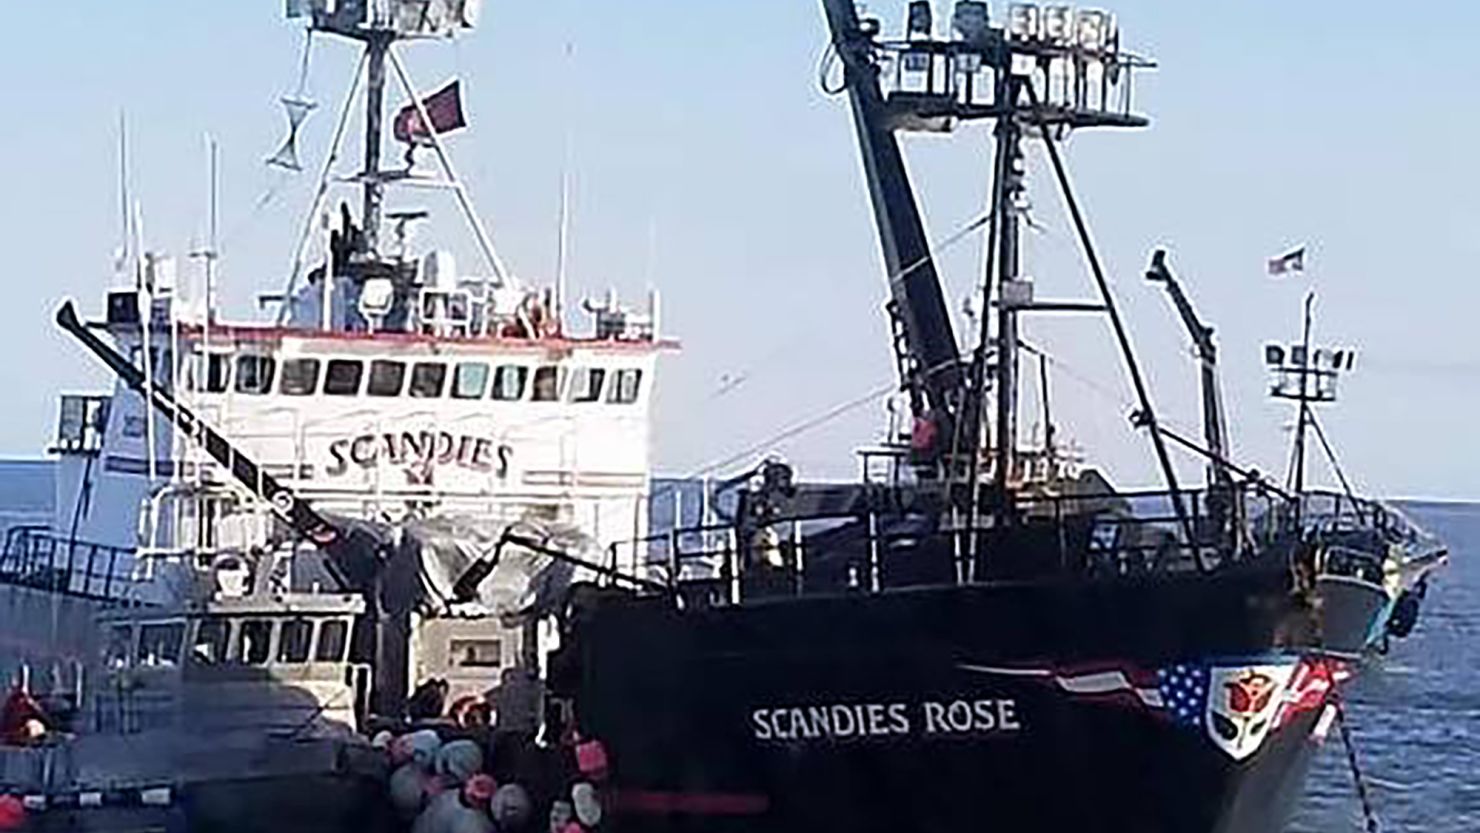 A photo of the Scandies Rose crab fishing vessel from the ship's Facebook page.